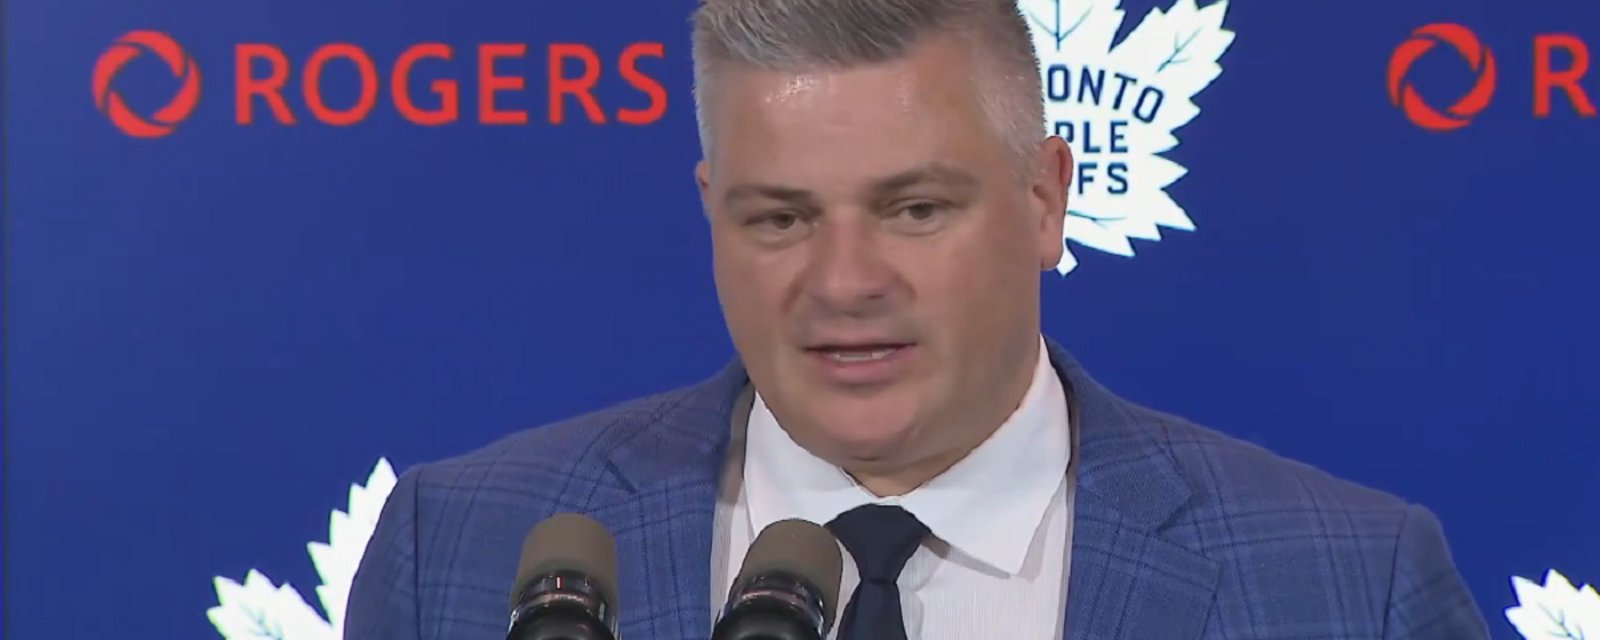 Sheldon Keefe calls out Matt Rempe after win on Saturday.